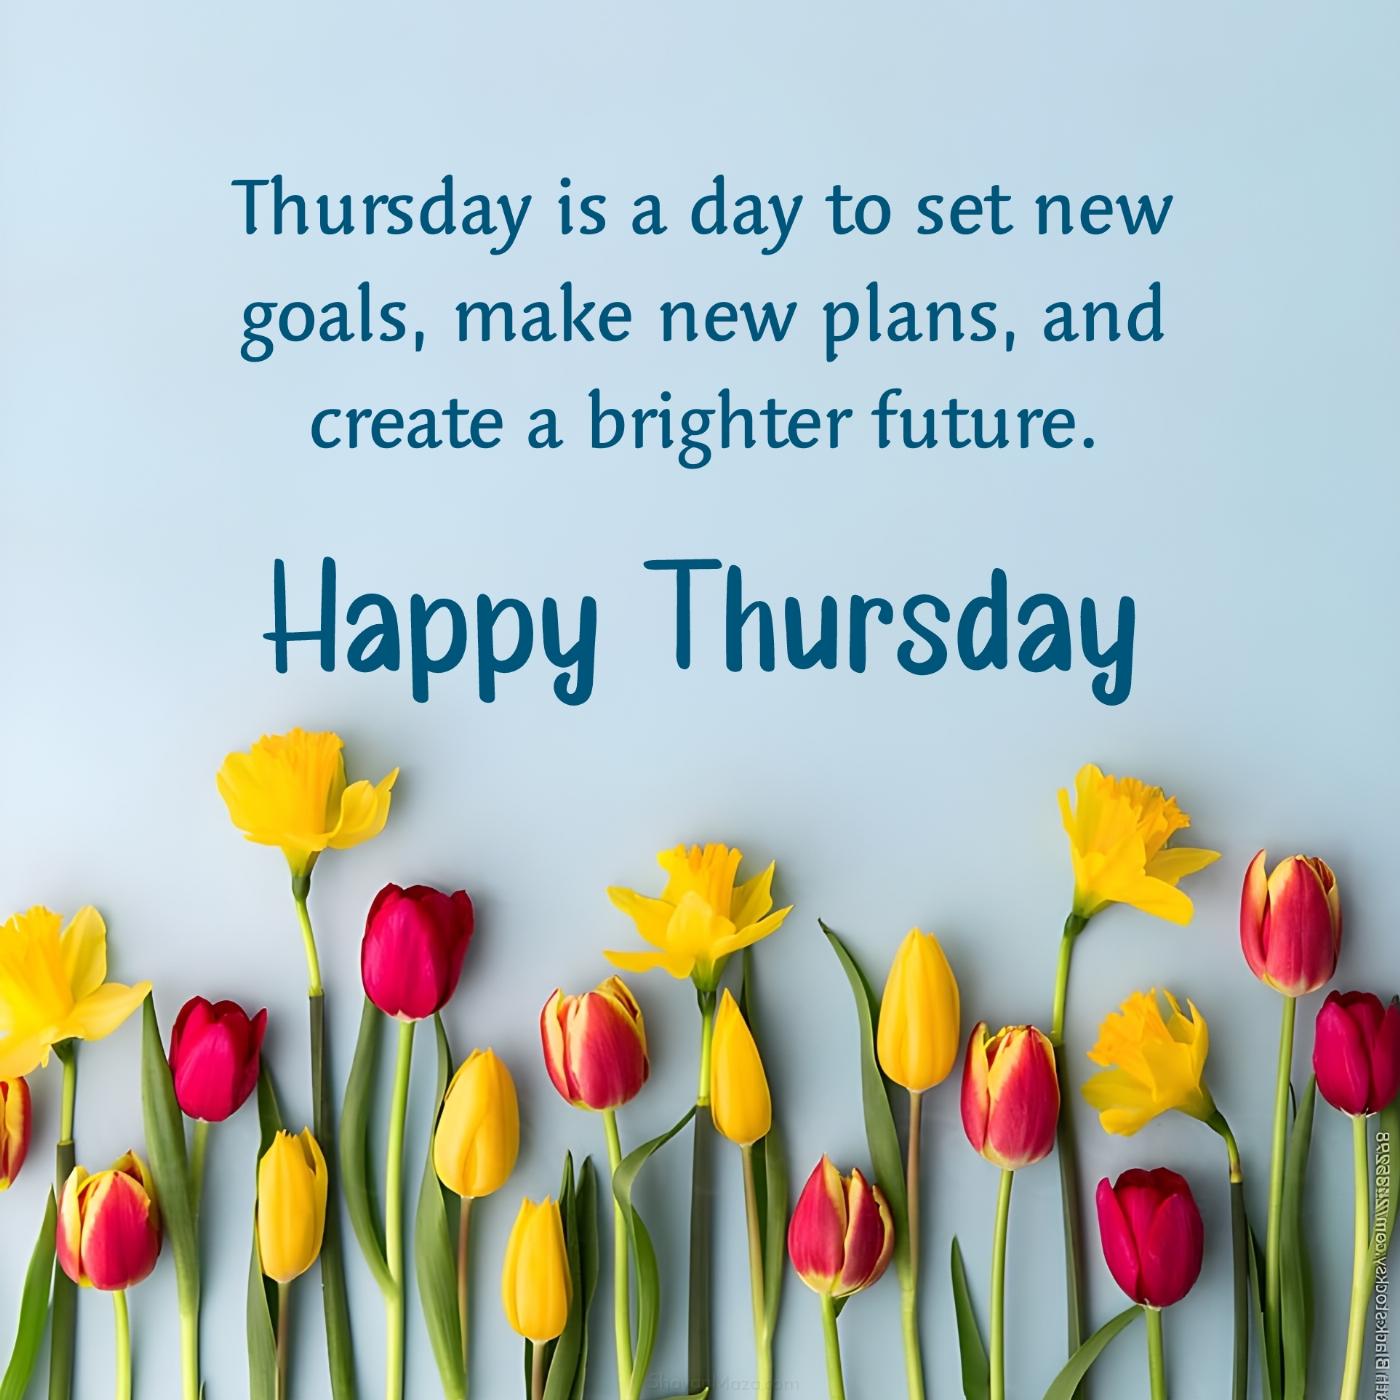 Thursday is a day to set new goals make new plans